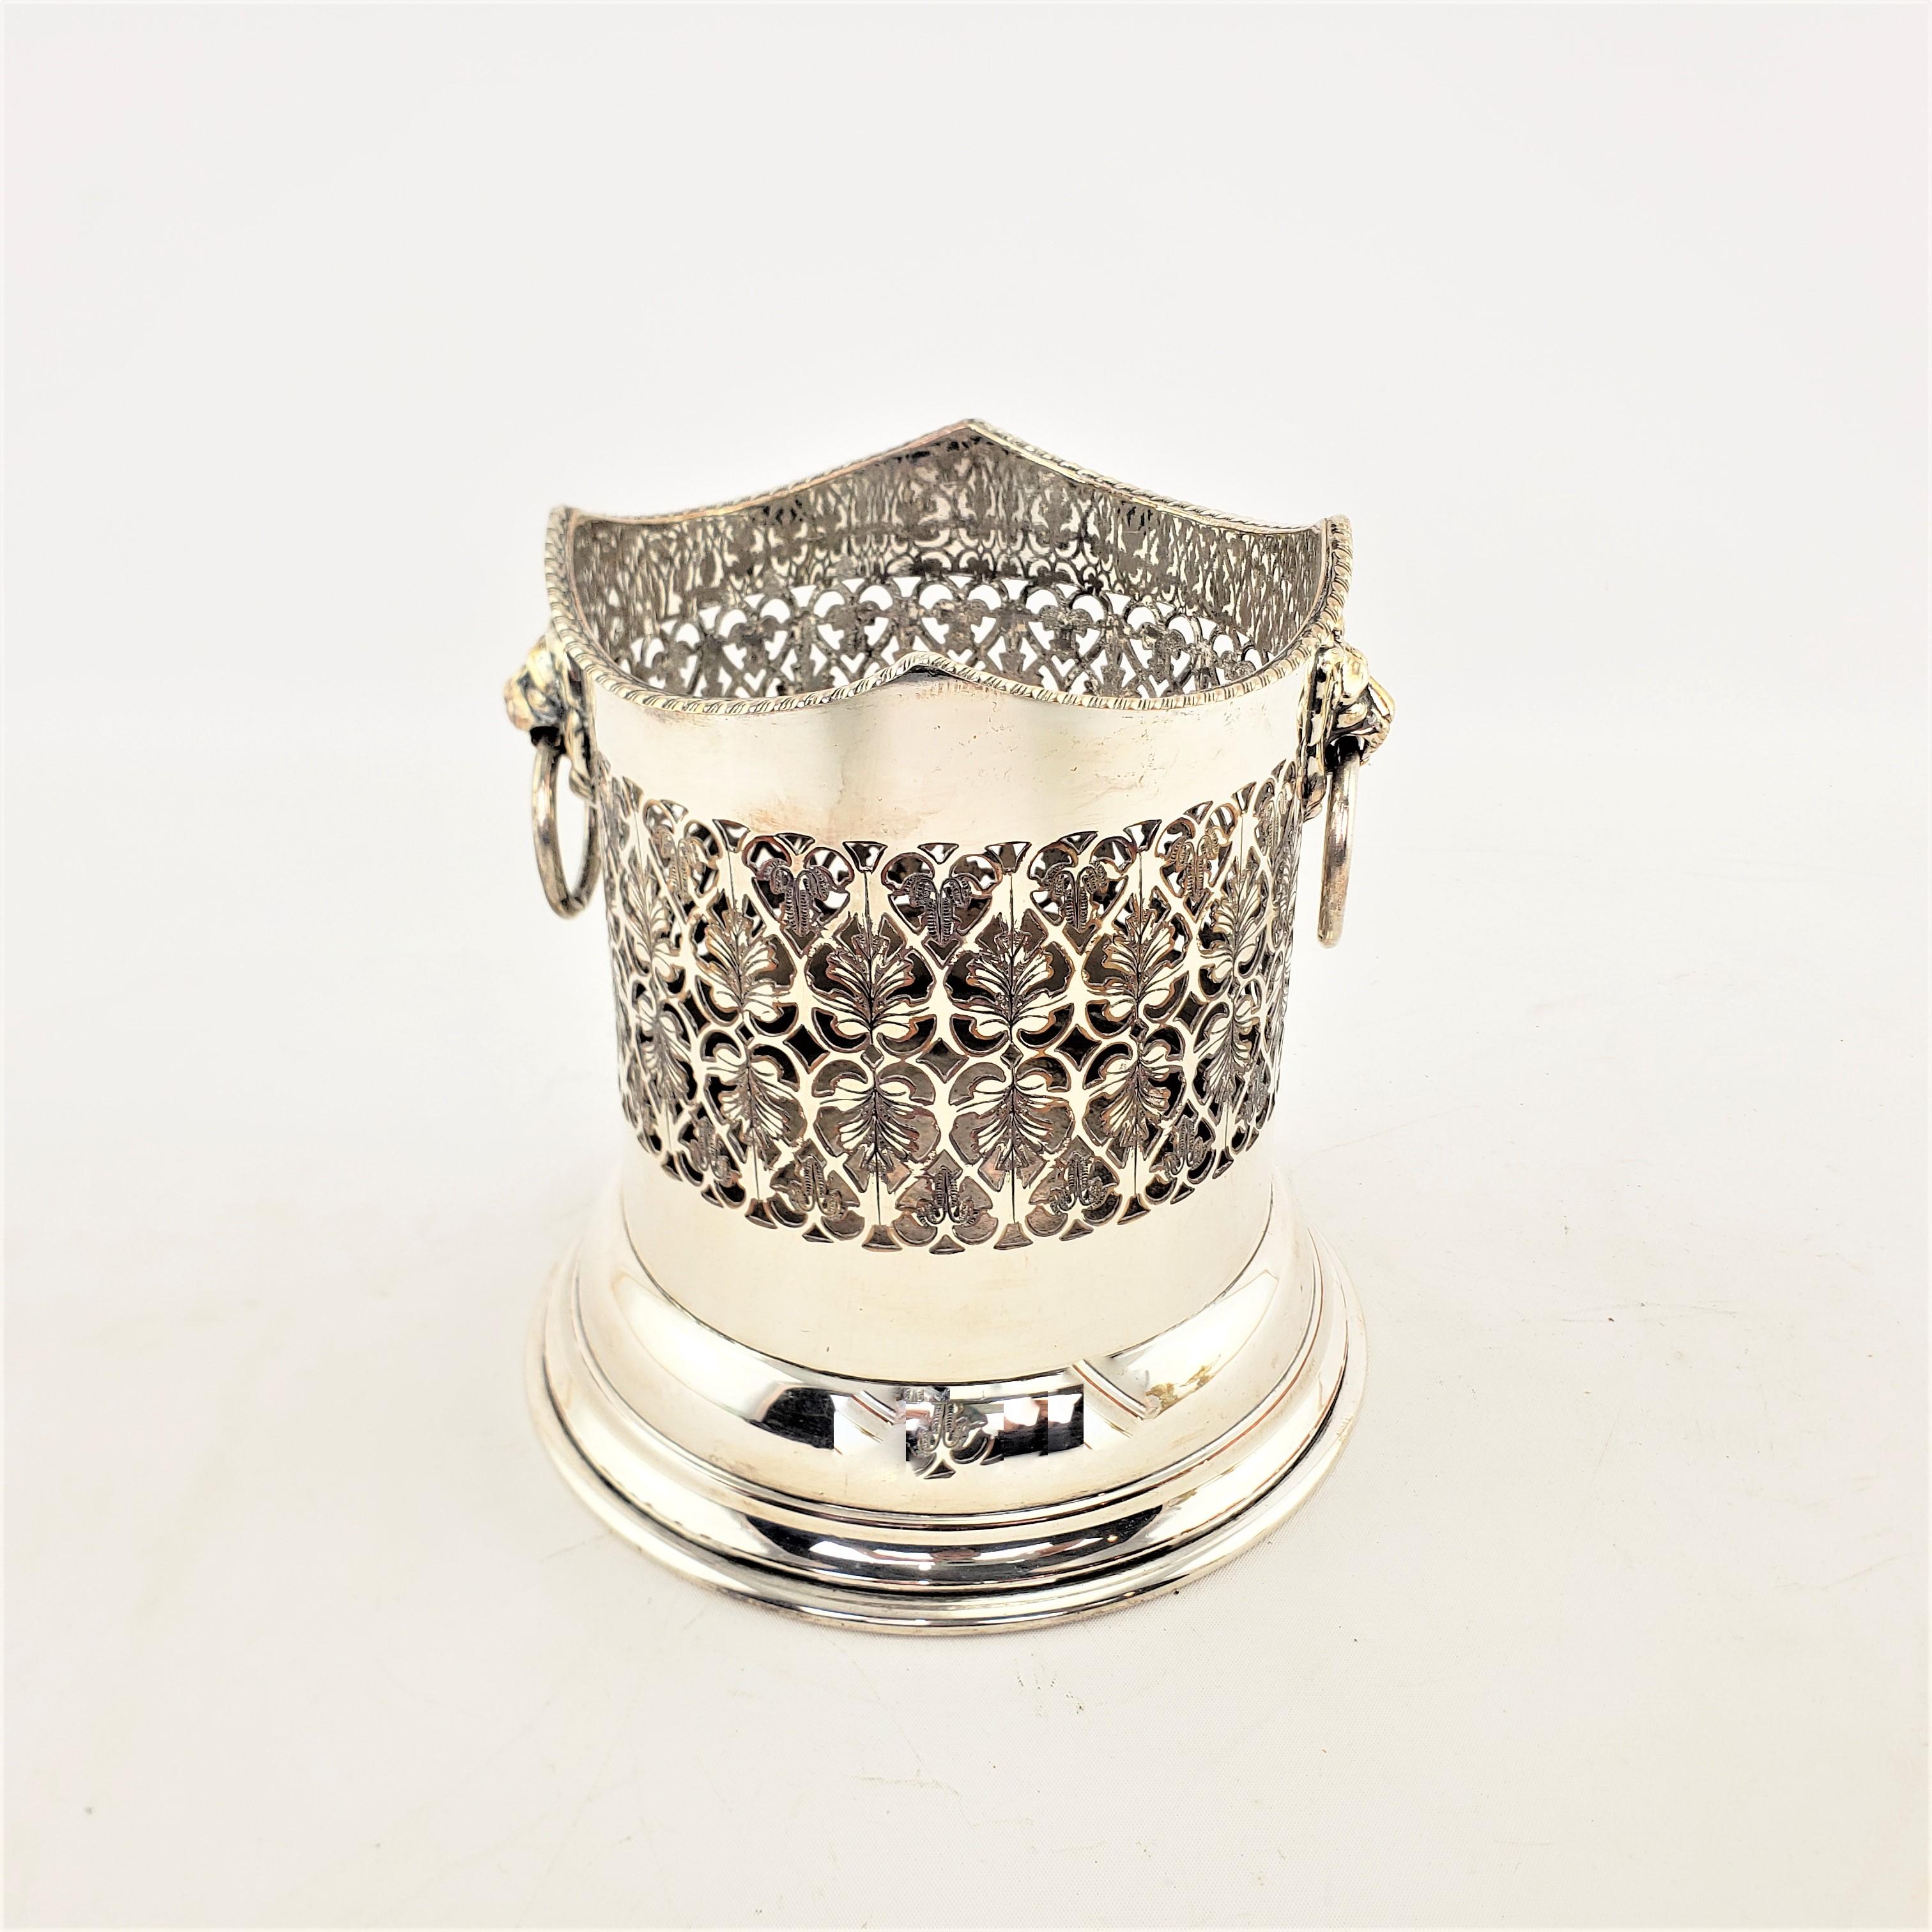 This antique bottle coaster is unsigned, but presumed to have originate from England and date to approximately 1920 and done in a Victorian style. This bottle coaster is composed of silver plate over copper with figural lion head mounted handles,